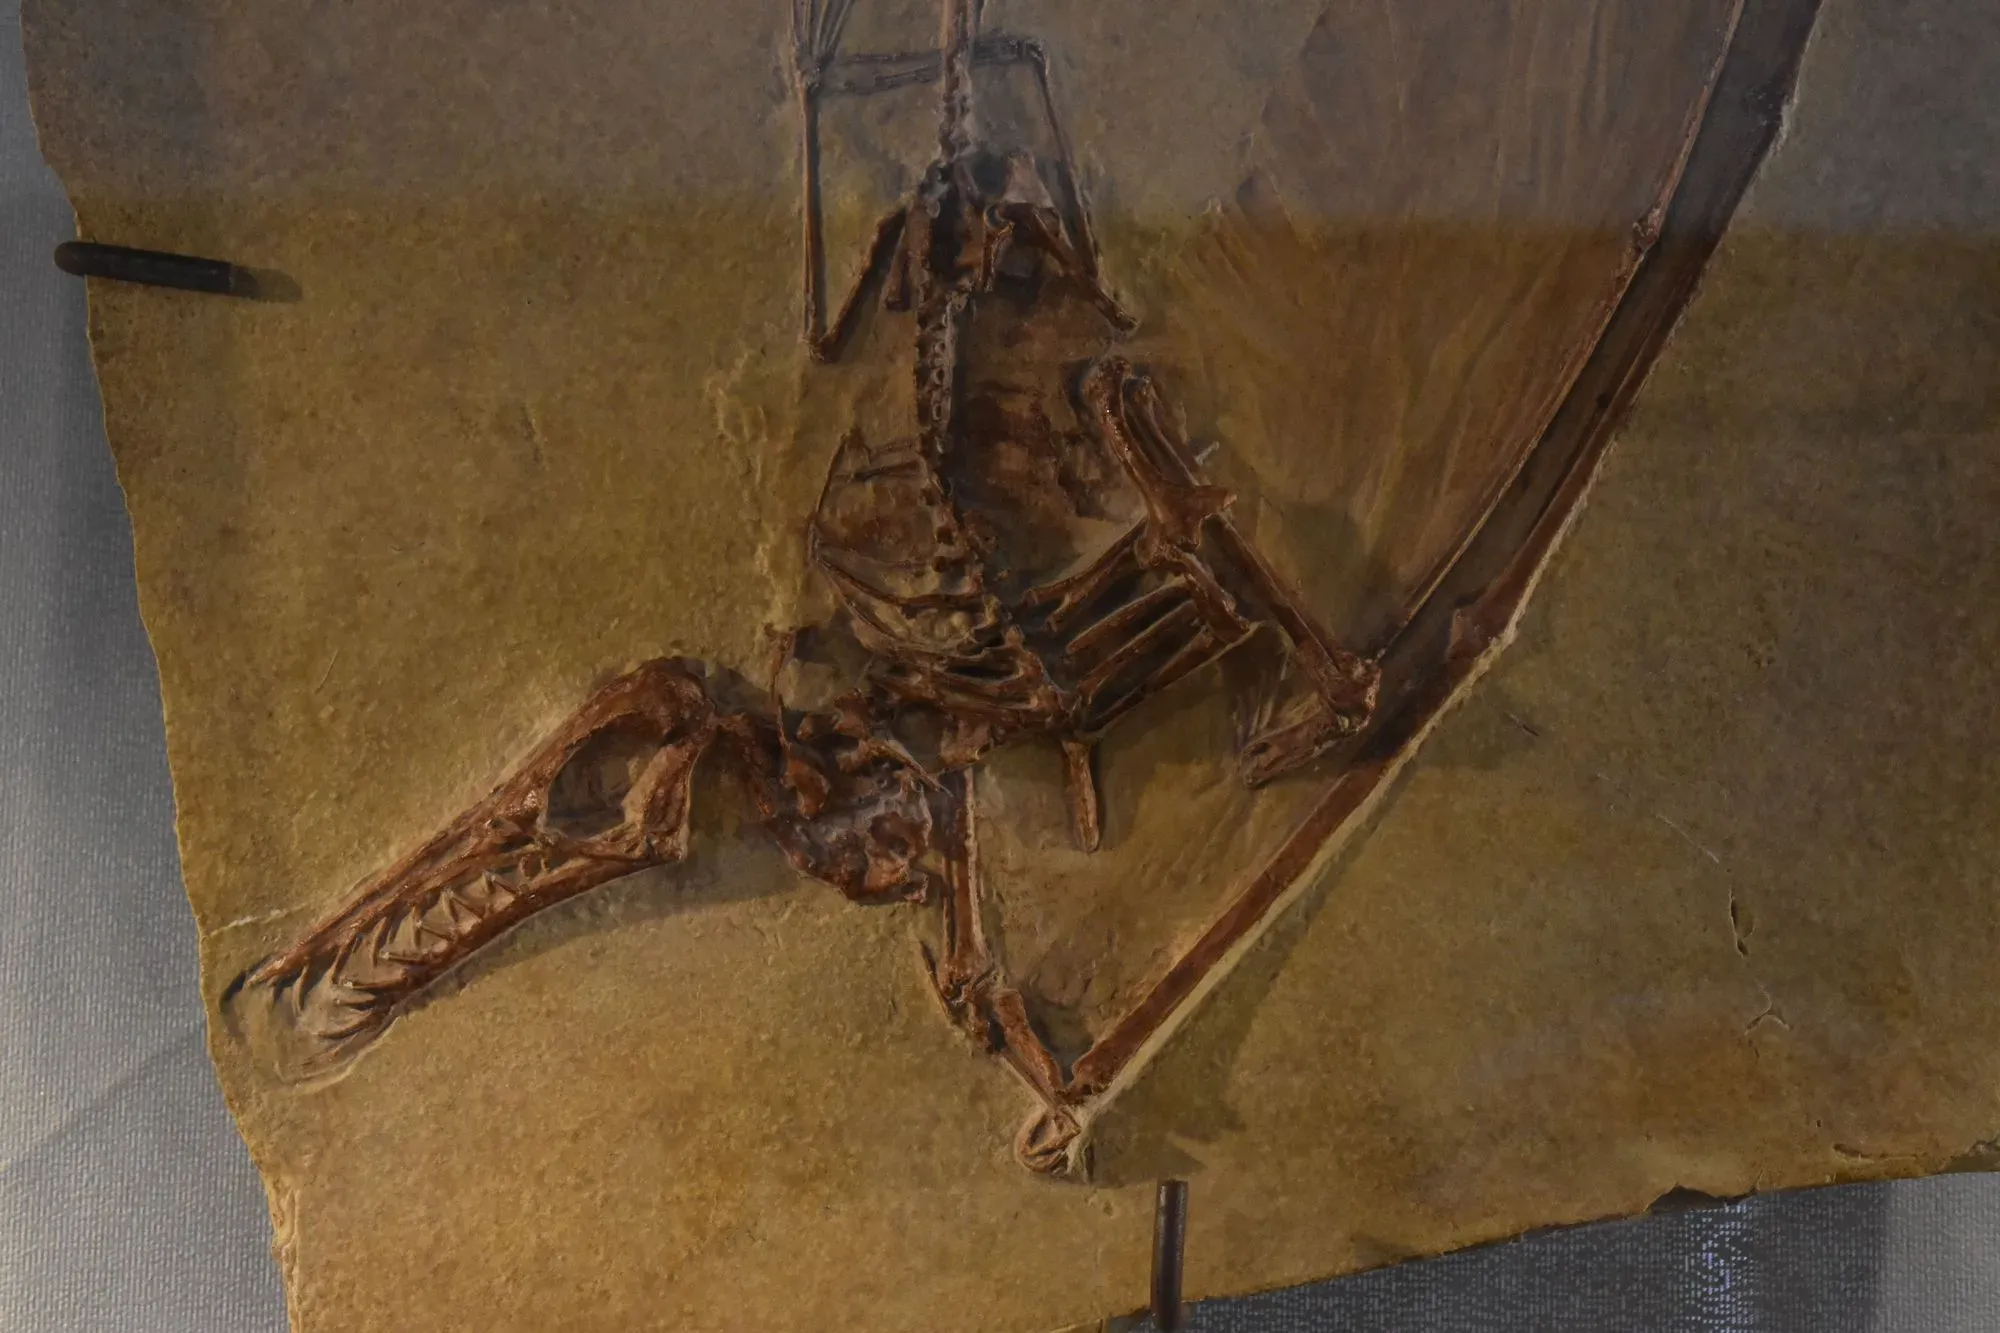 The specimen discovered suggests the Rhamphorhynchus belonged to the flying Pterosaurs family.